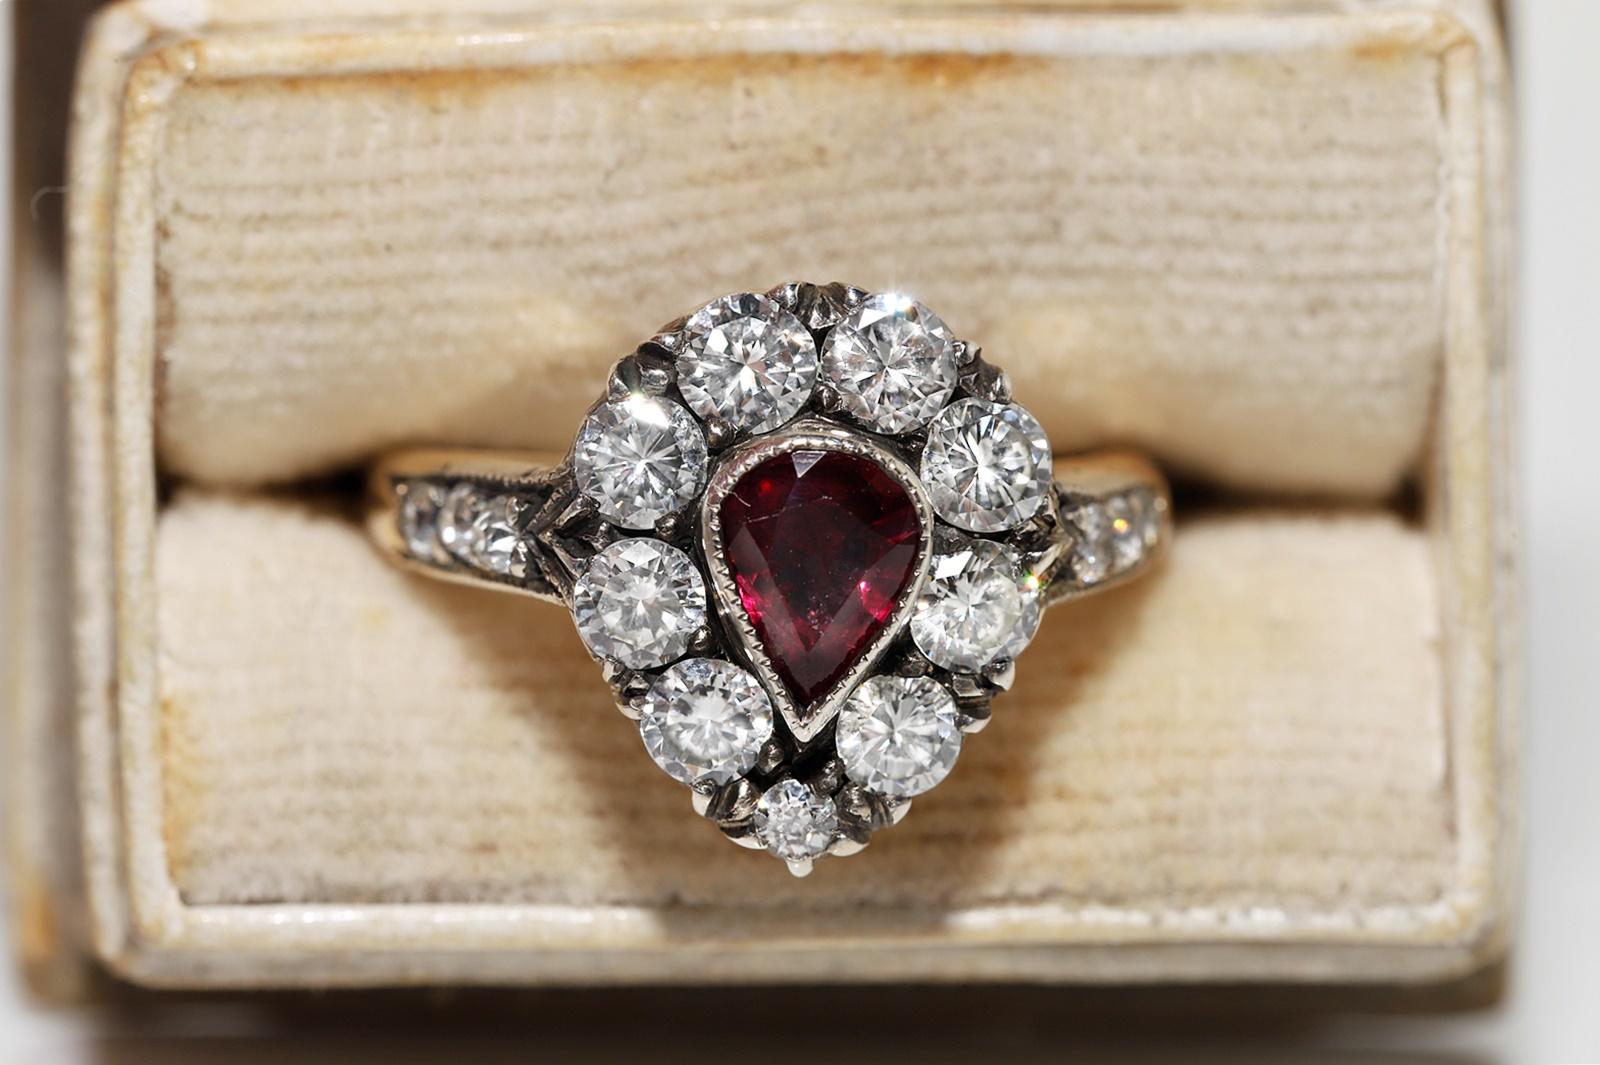 In very good condition.
Total weight is 5 grams.
Totally is diamond 1.05 ct.
The diamond is has G color and vvs-vs-s1 clarity.
Totally is ruby 0.50 ct.
Ring size is US 6.5 (We offer free resizing)
We can make any size.
Box is not included.
Please